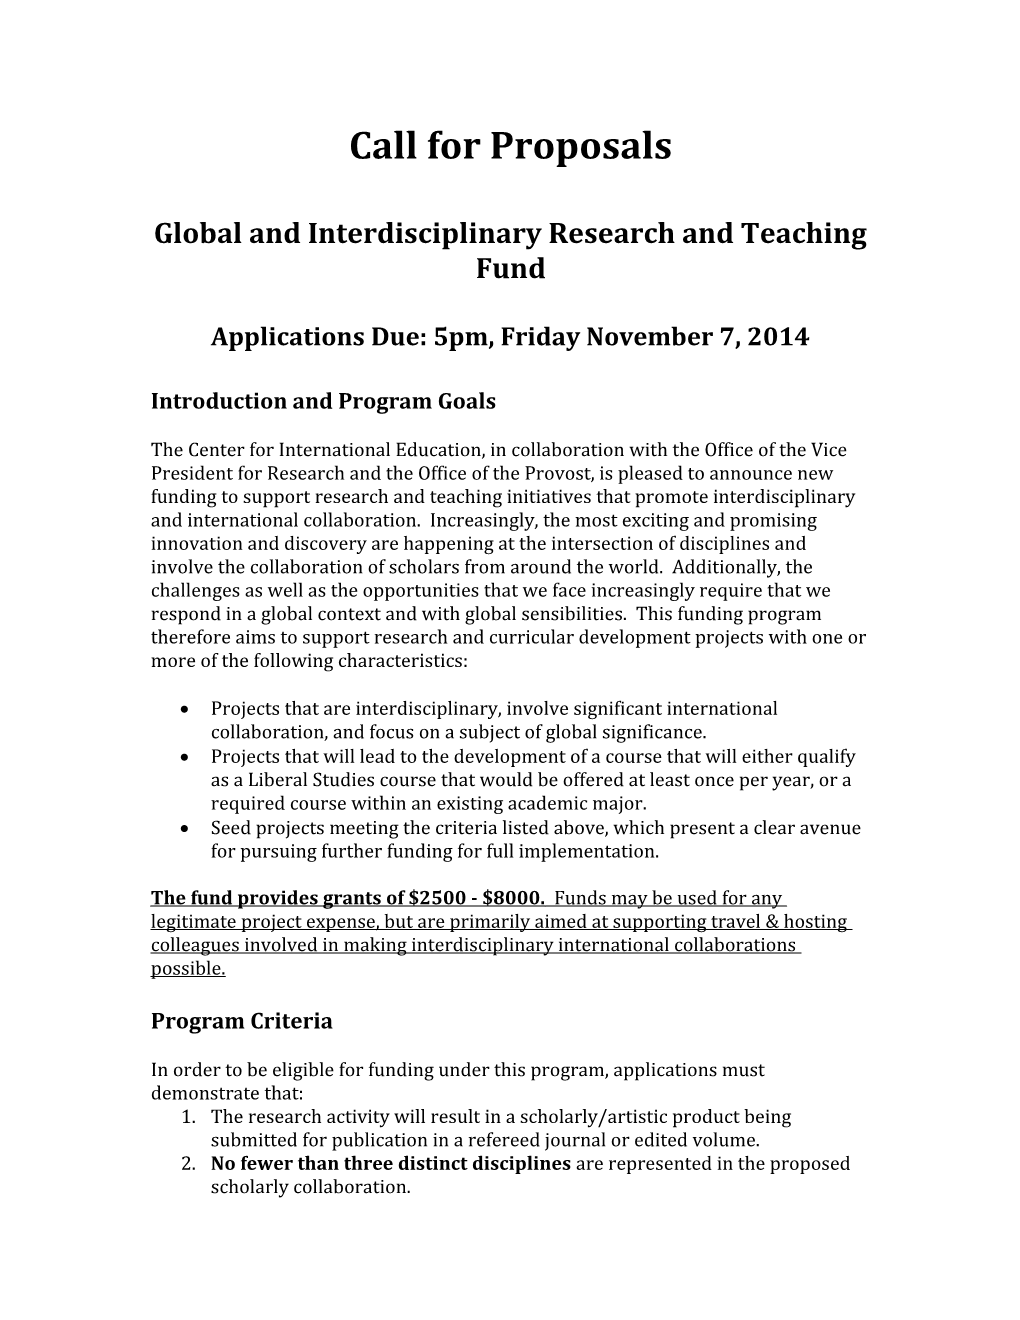 Global and Interdisciplinary Research and Teaching Fund